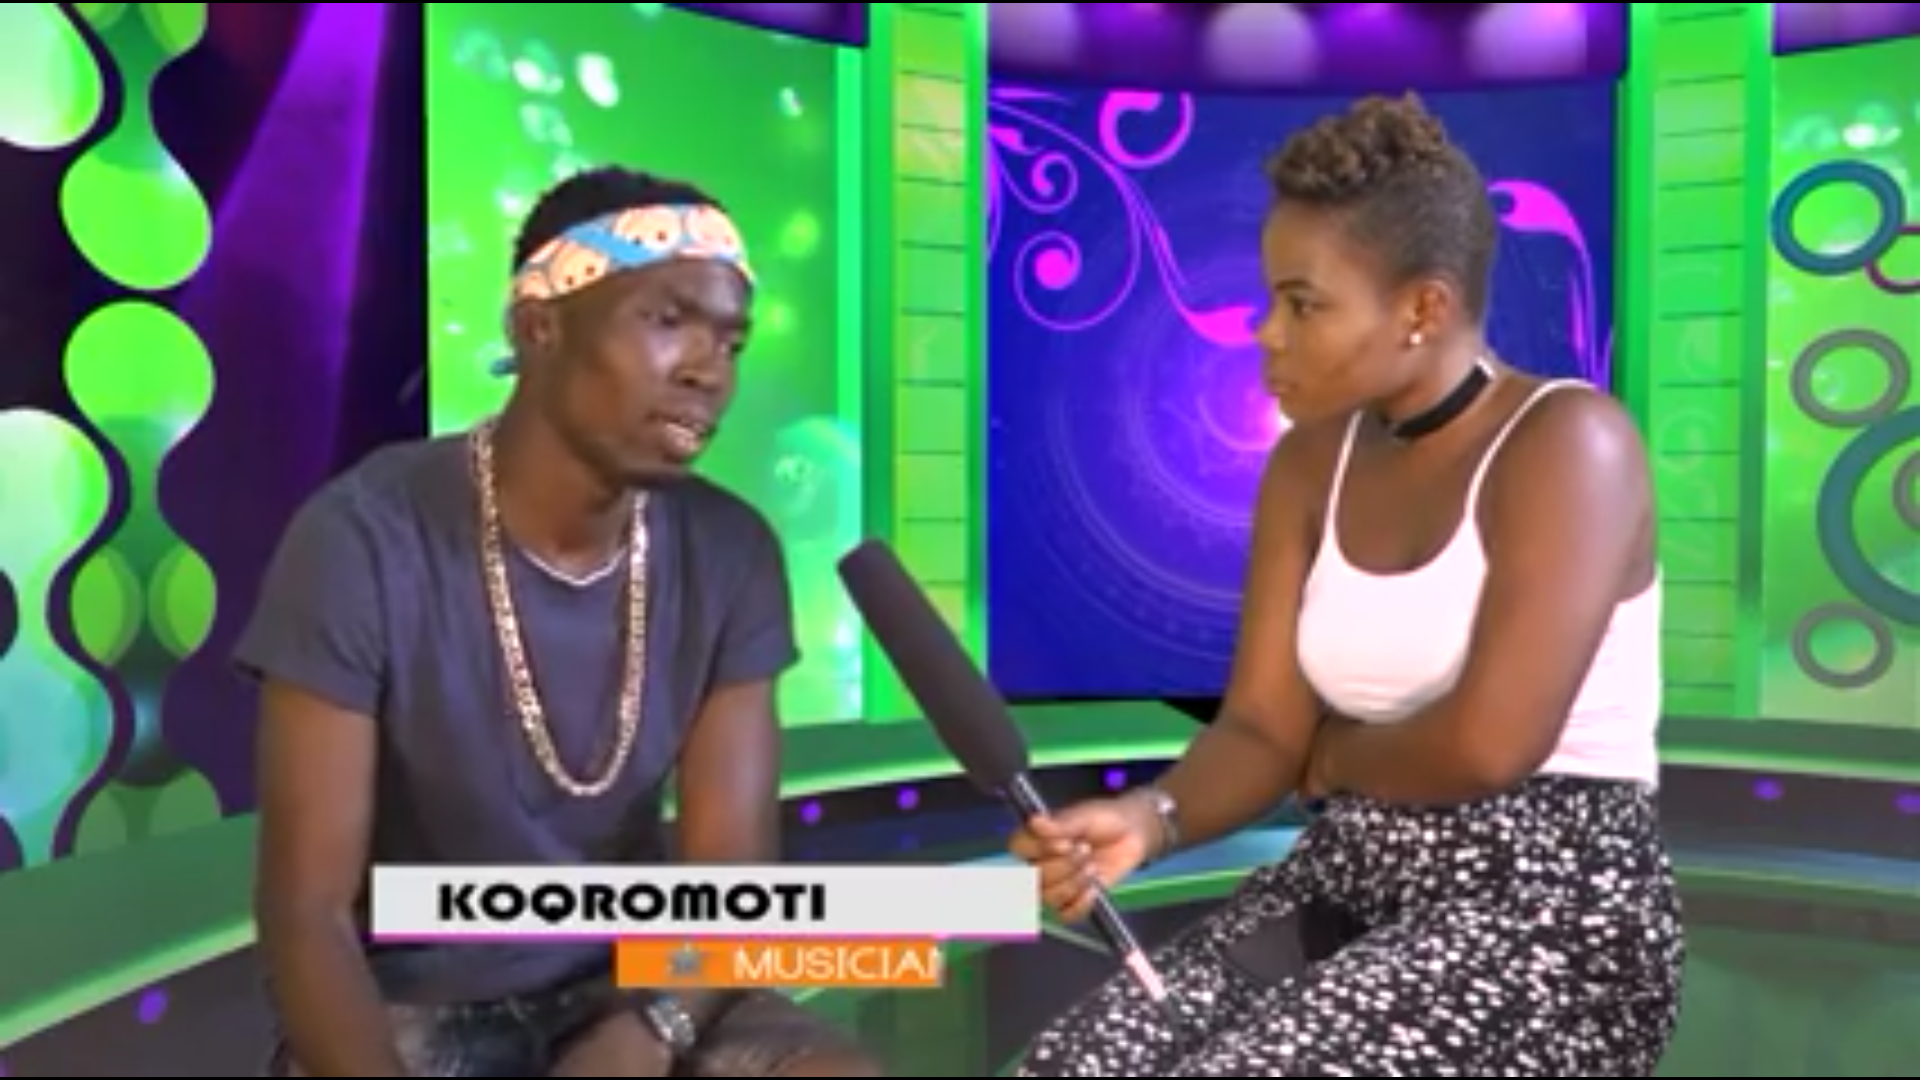 Koqromoti Talks About His New Song And Working With Luther.